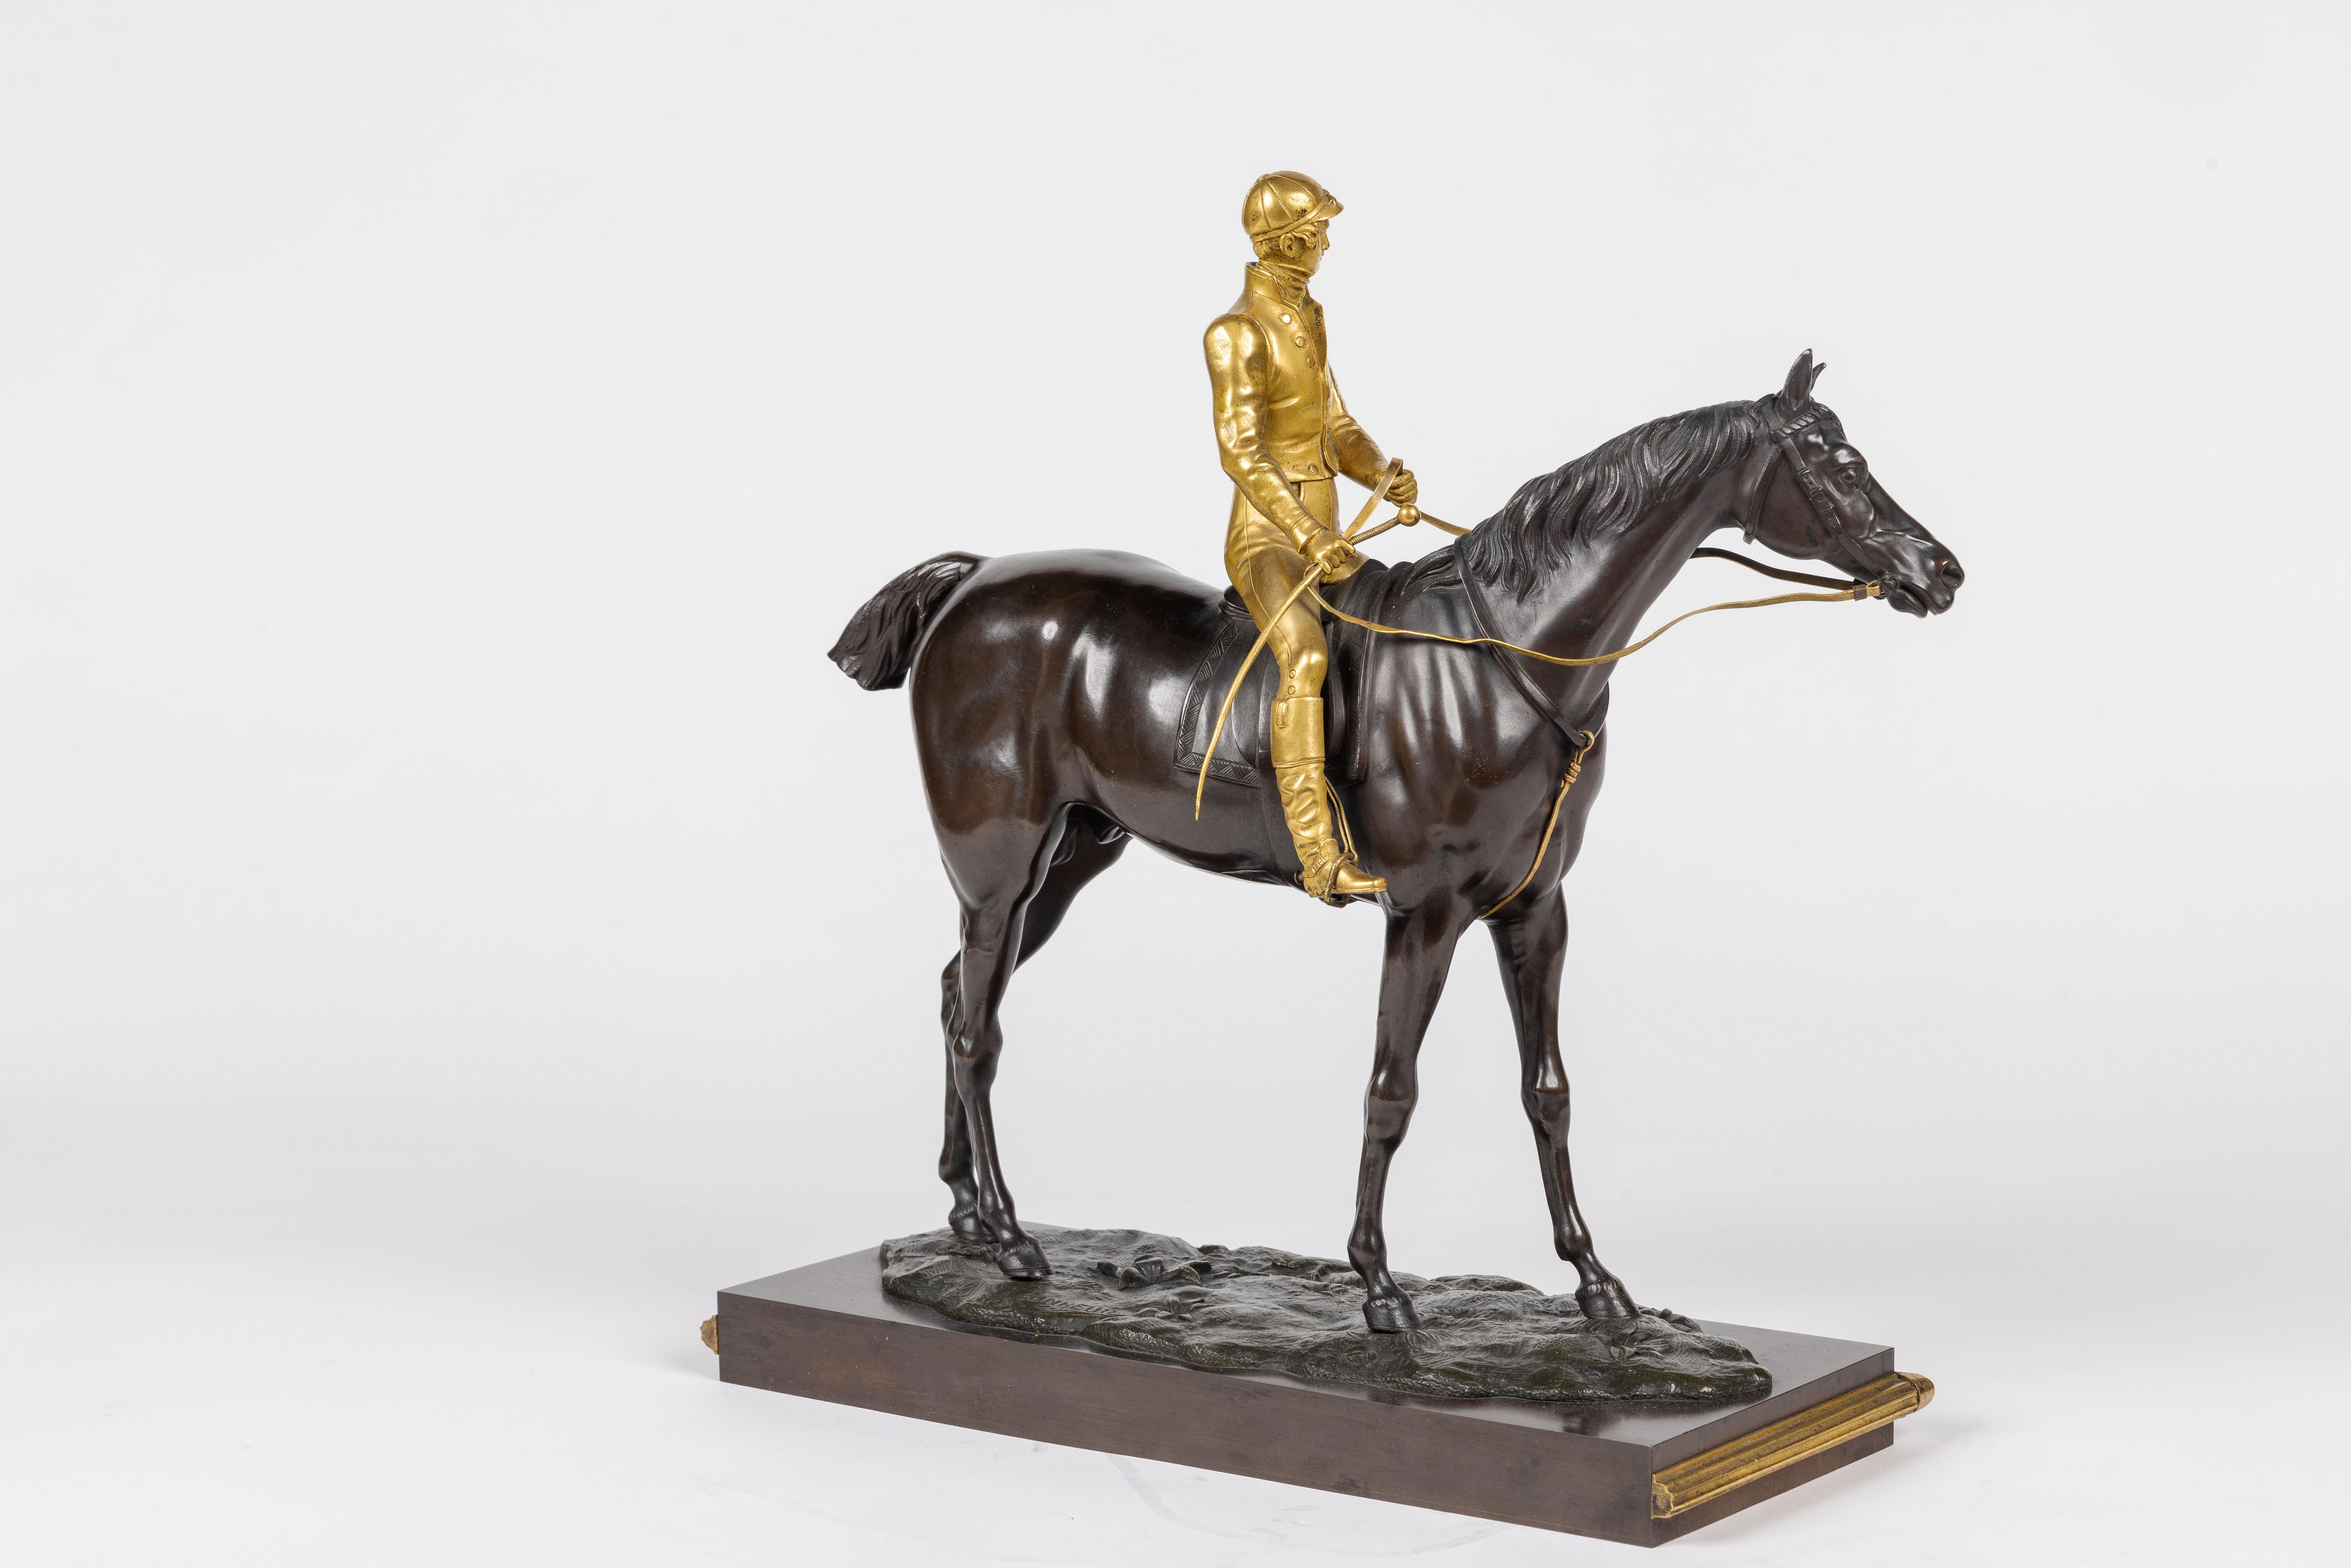 A Rare Gilt and Patinated Bronze Jockey on A Horse, circa 1875 - Sculpture by Isidore Jules Bonheur